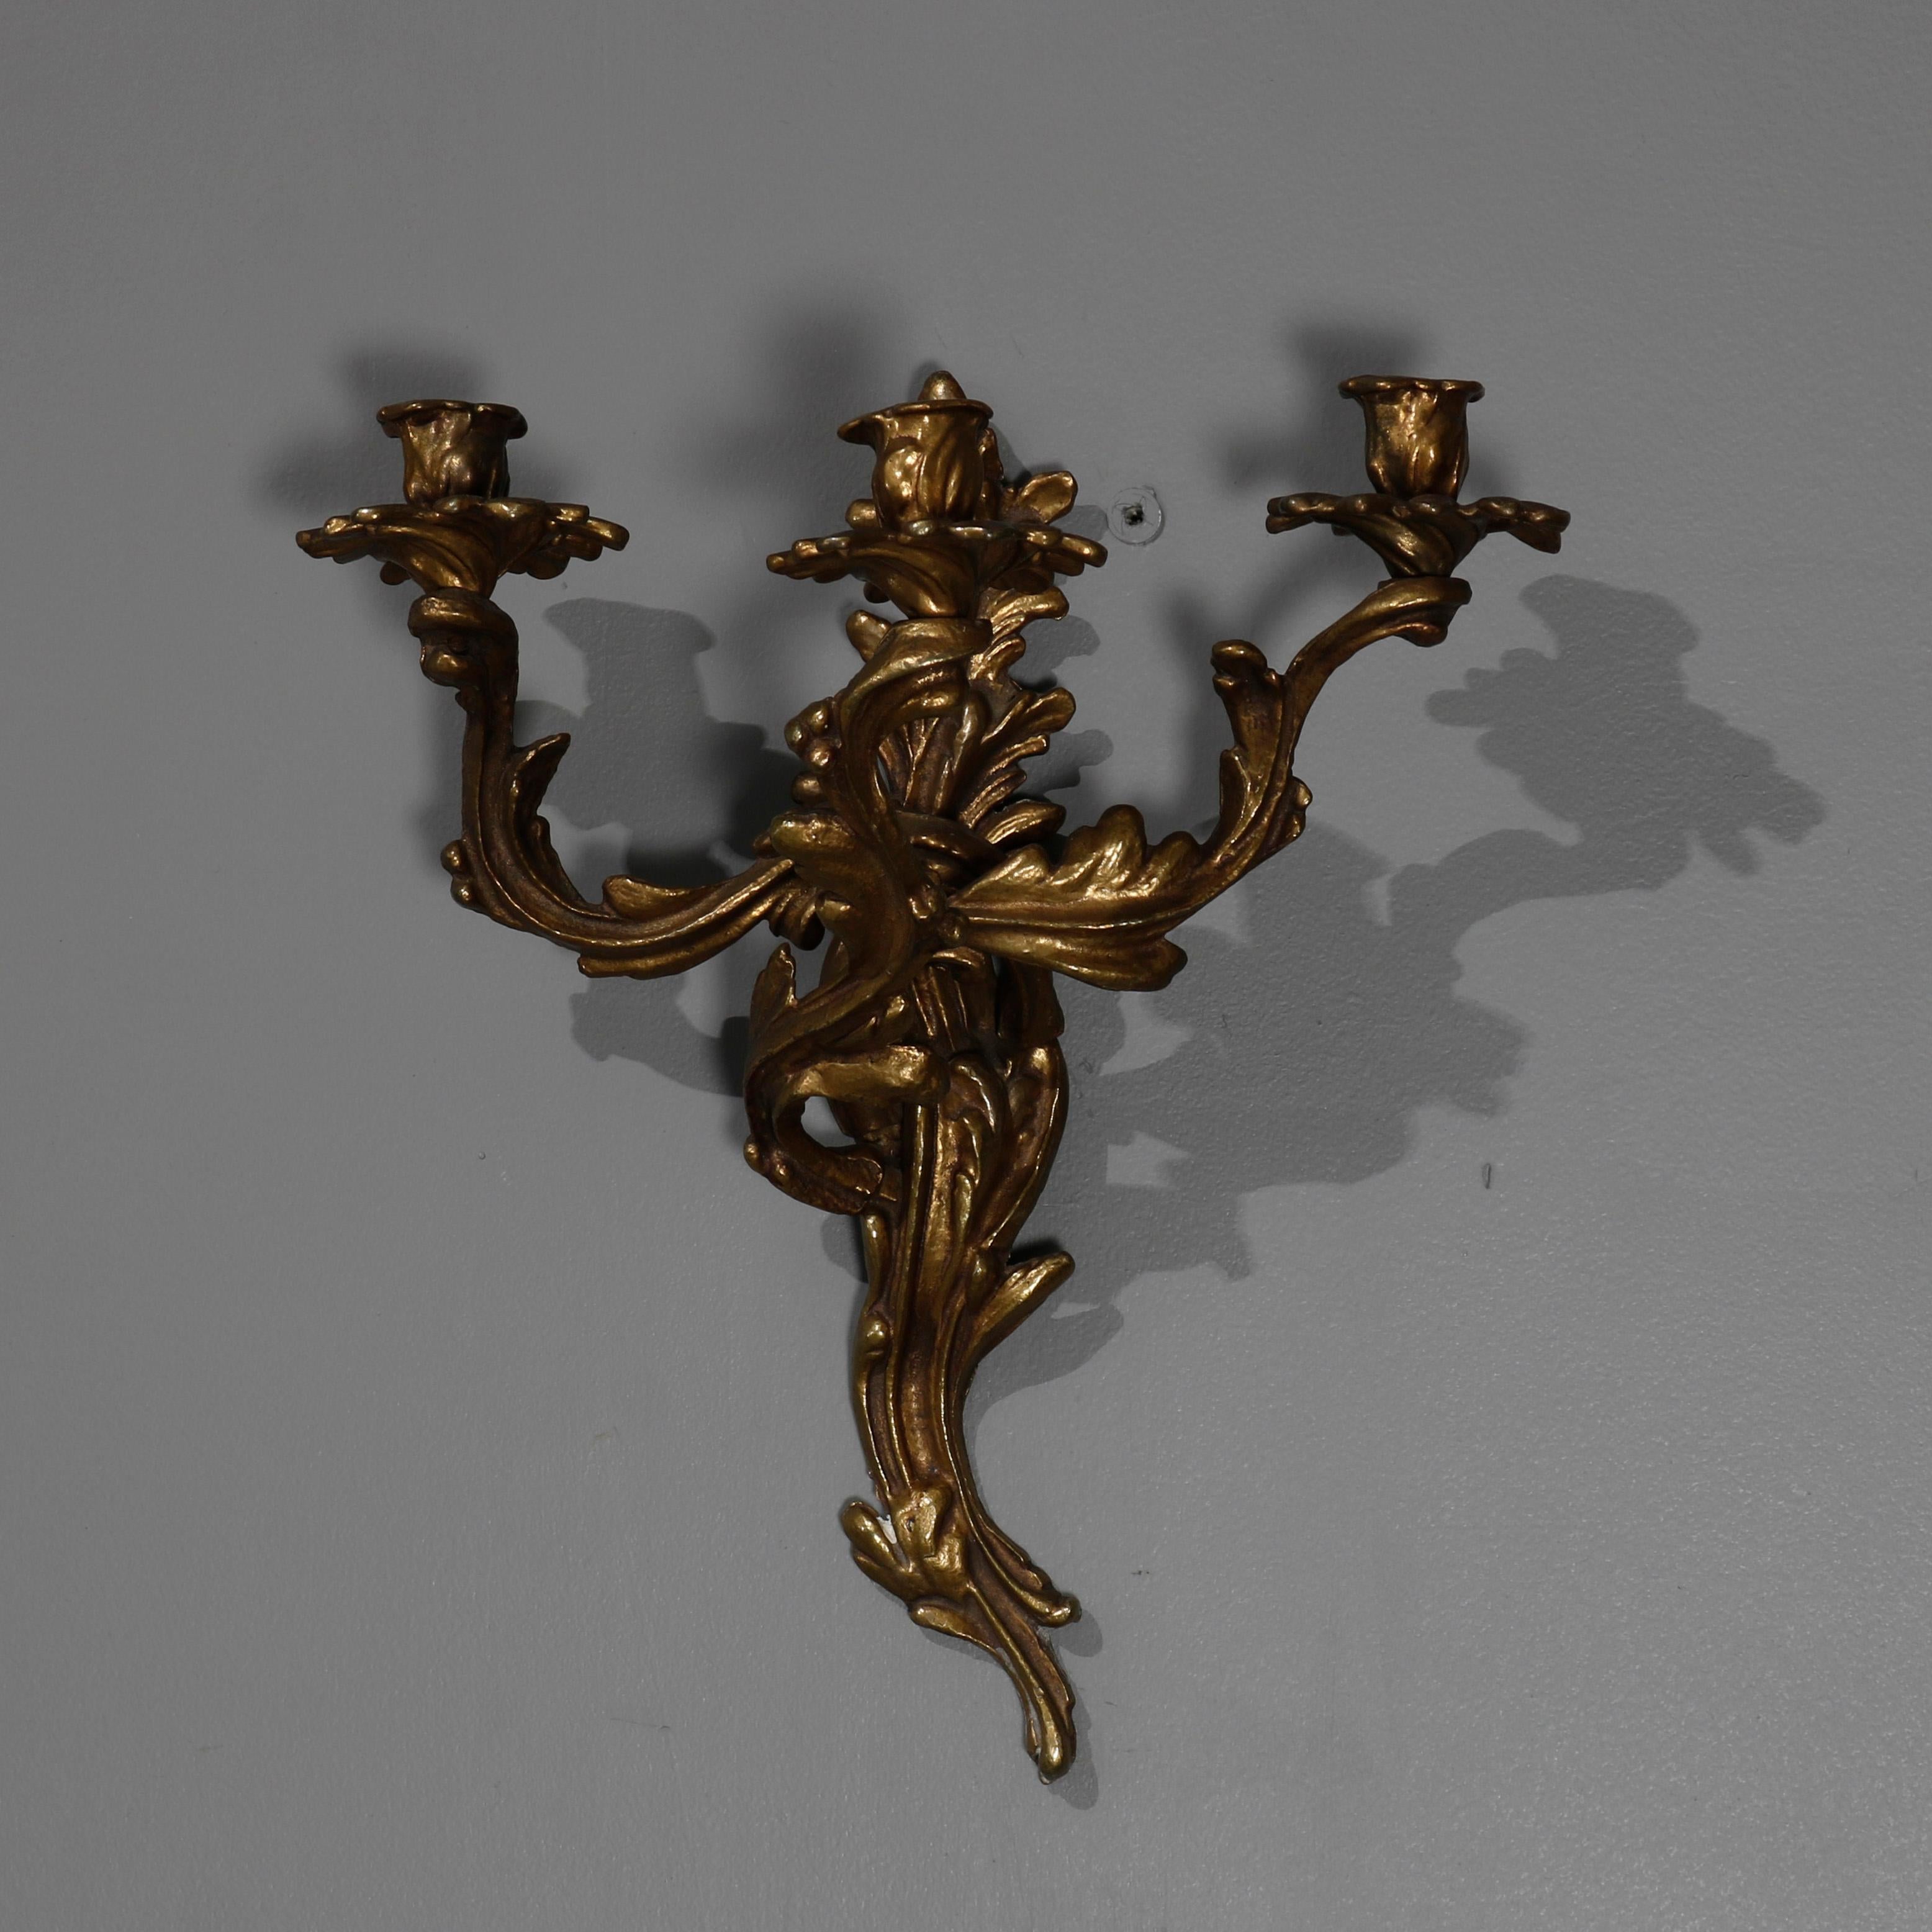 A pair of antique French Louis XIV wall sconces offer cast bronze in foliate form with three arms terminating in candle sockets, circa 1880.

***DELIVERY NOTICE – Due to COVID-19 we are employing NO-CONTACT PRACTICES in the transfer of purchased